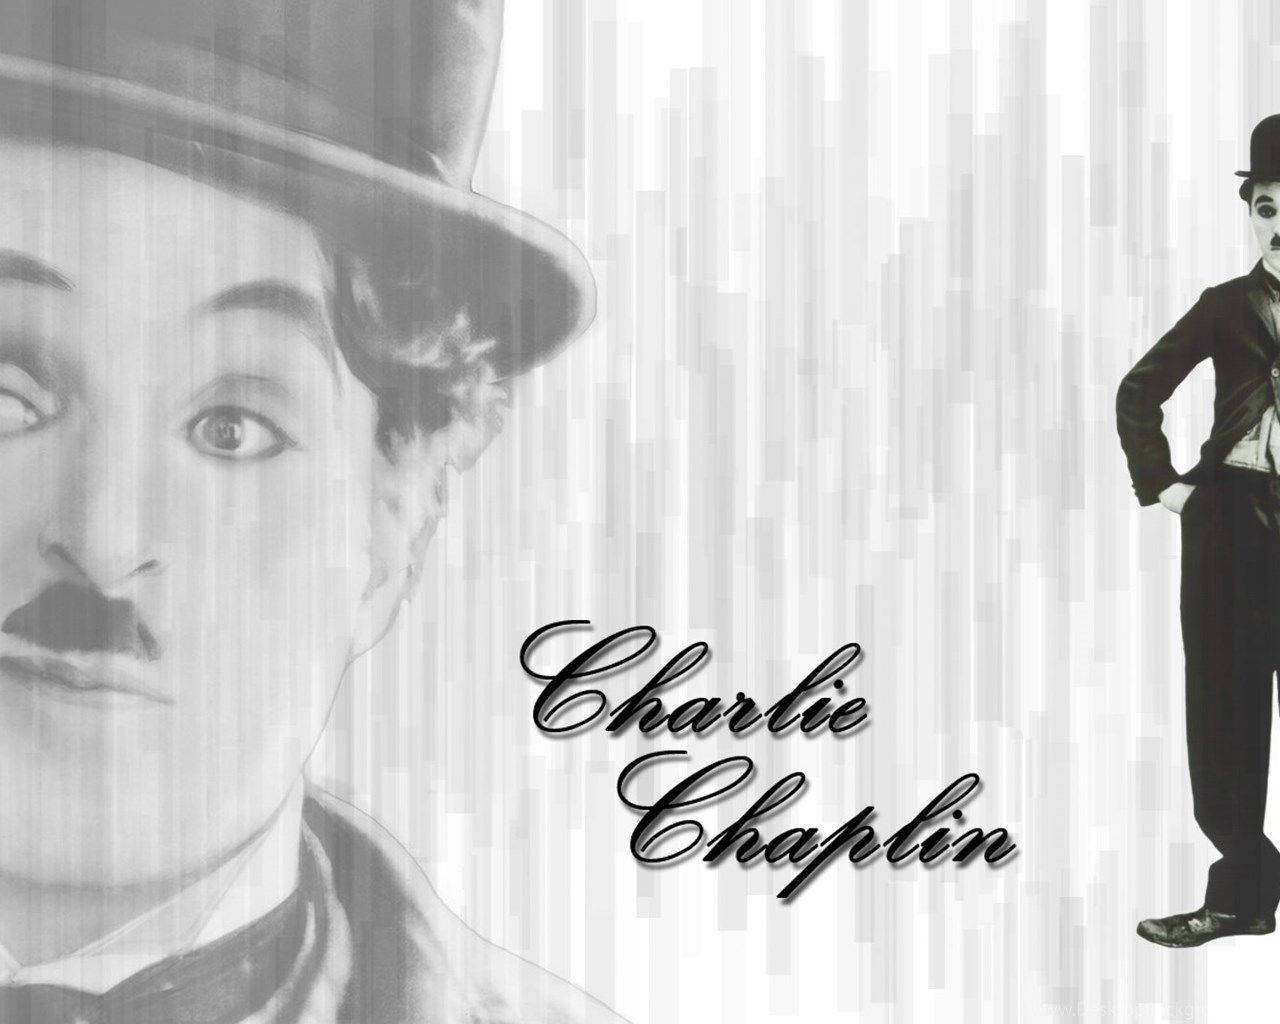 Charlie Chaplin – The Pioneer Of Comedic Silent Films Background